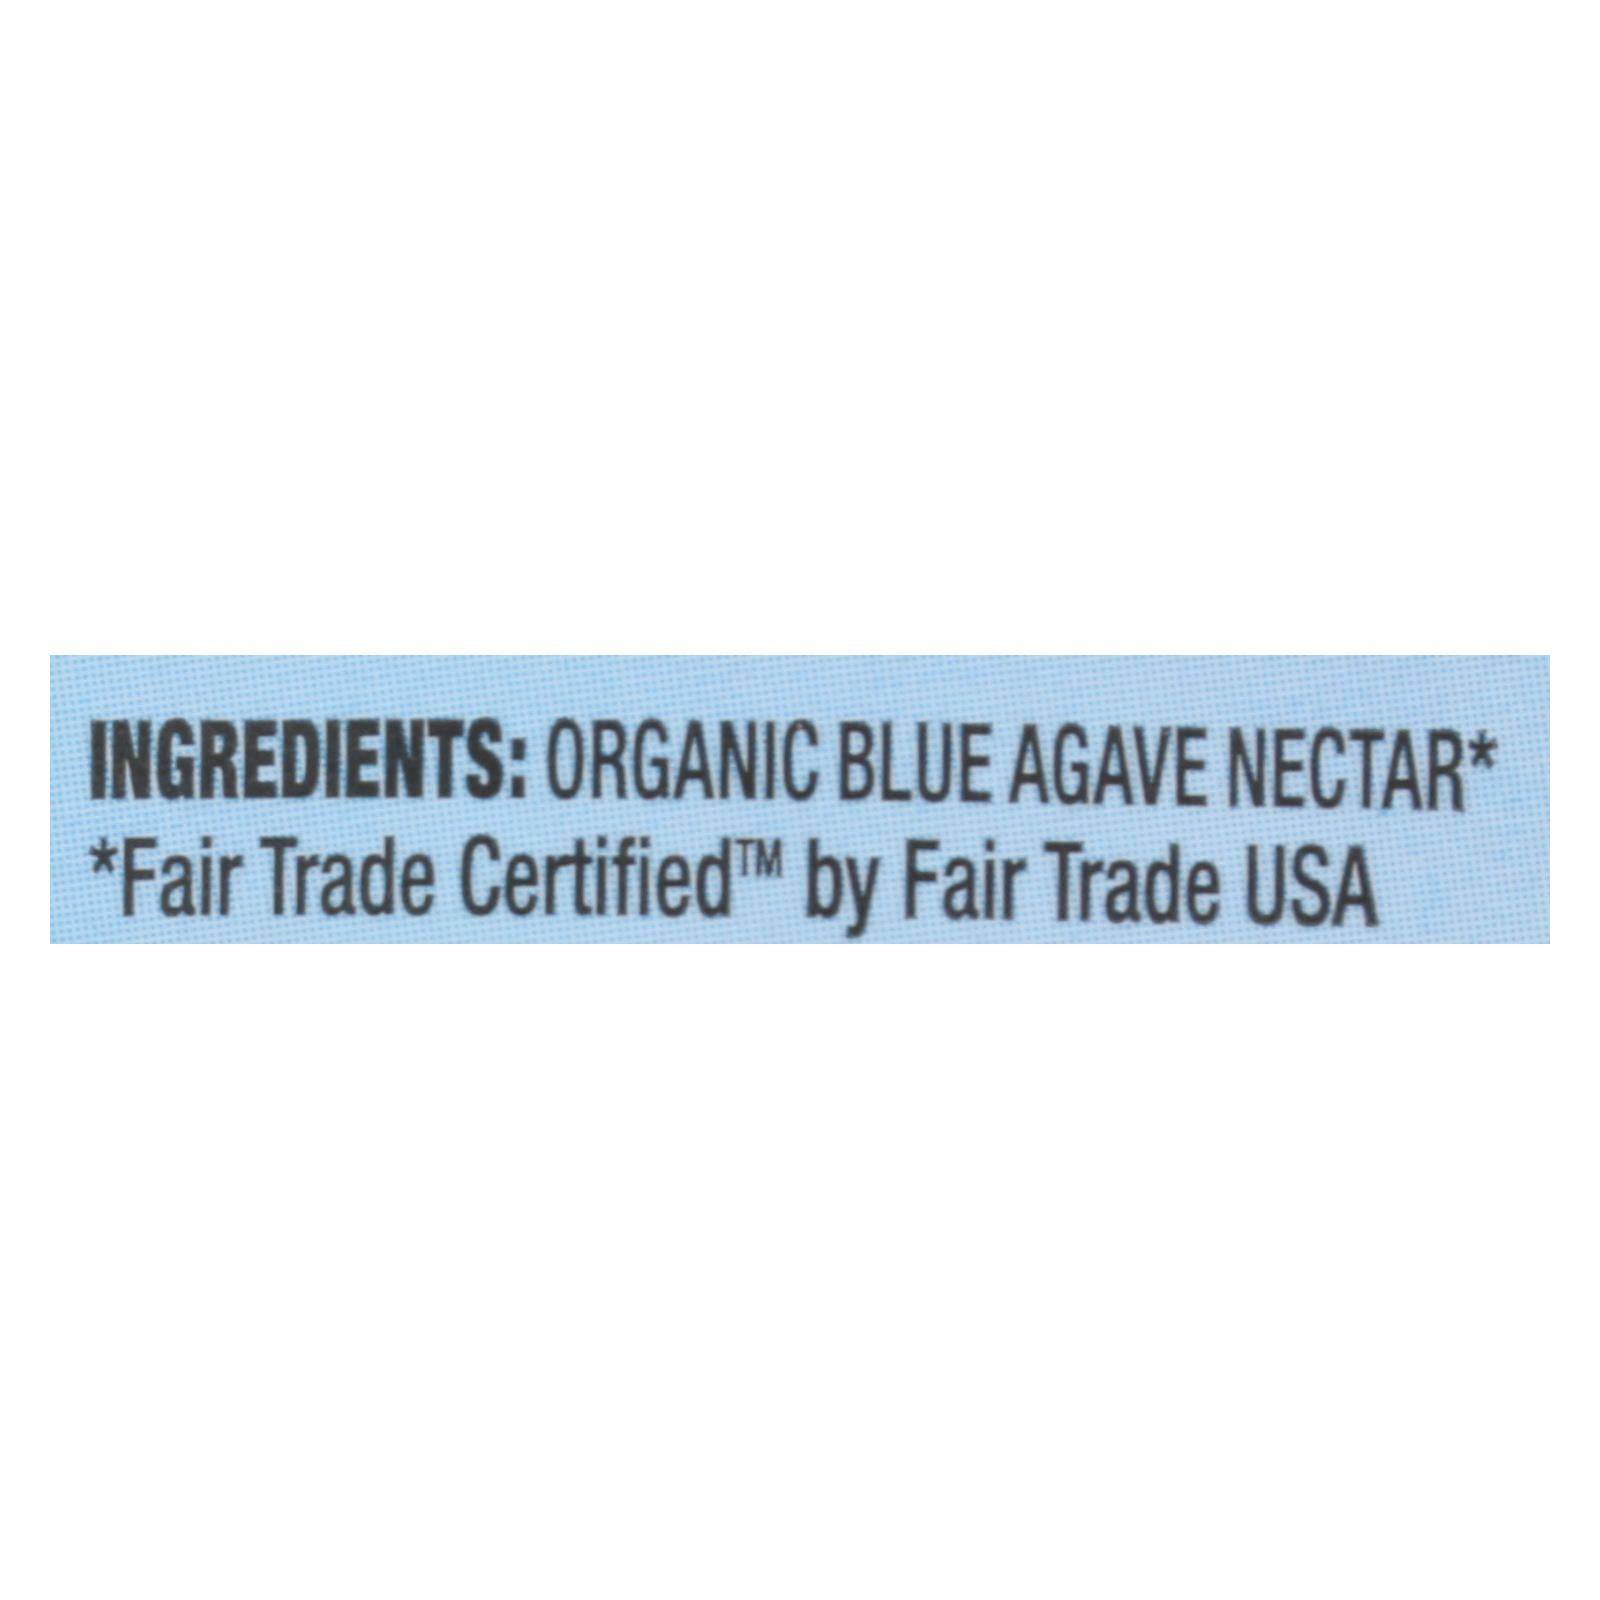 Buy Wholesome Sweeteners Blue Agave - Organic - 44 Oz - Case Of 6  at OnlyNaturals.us